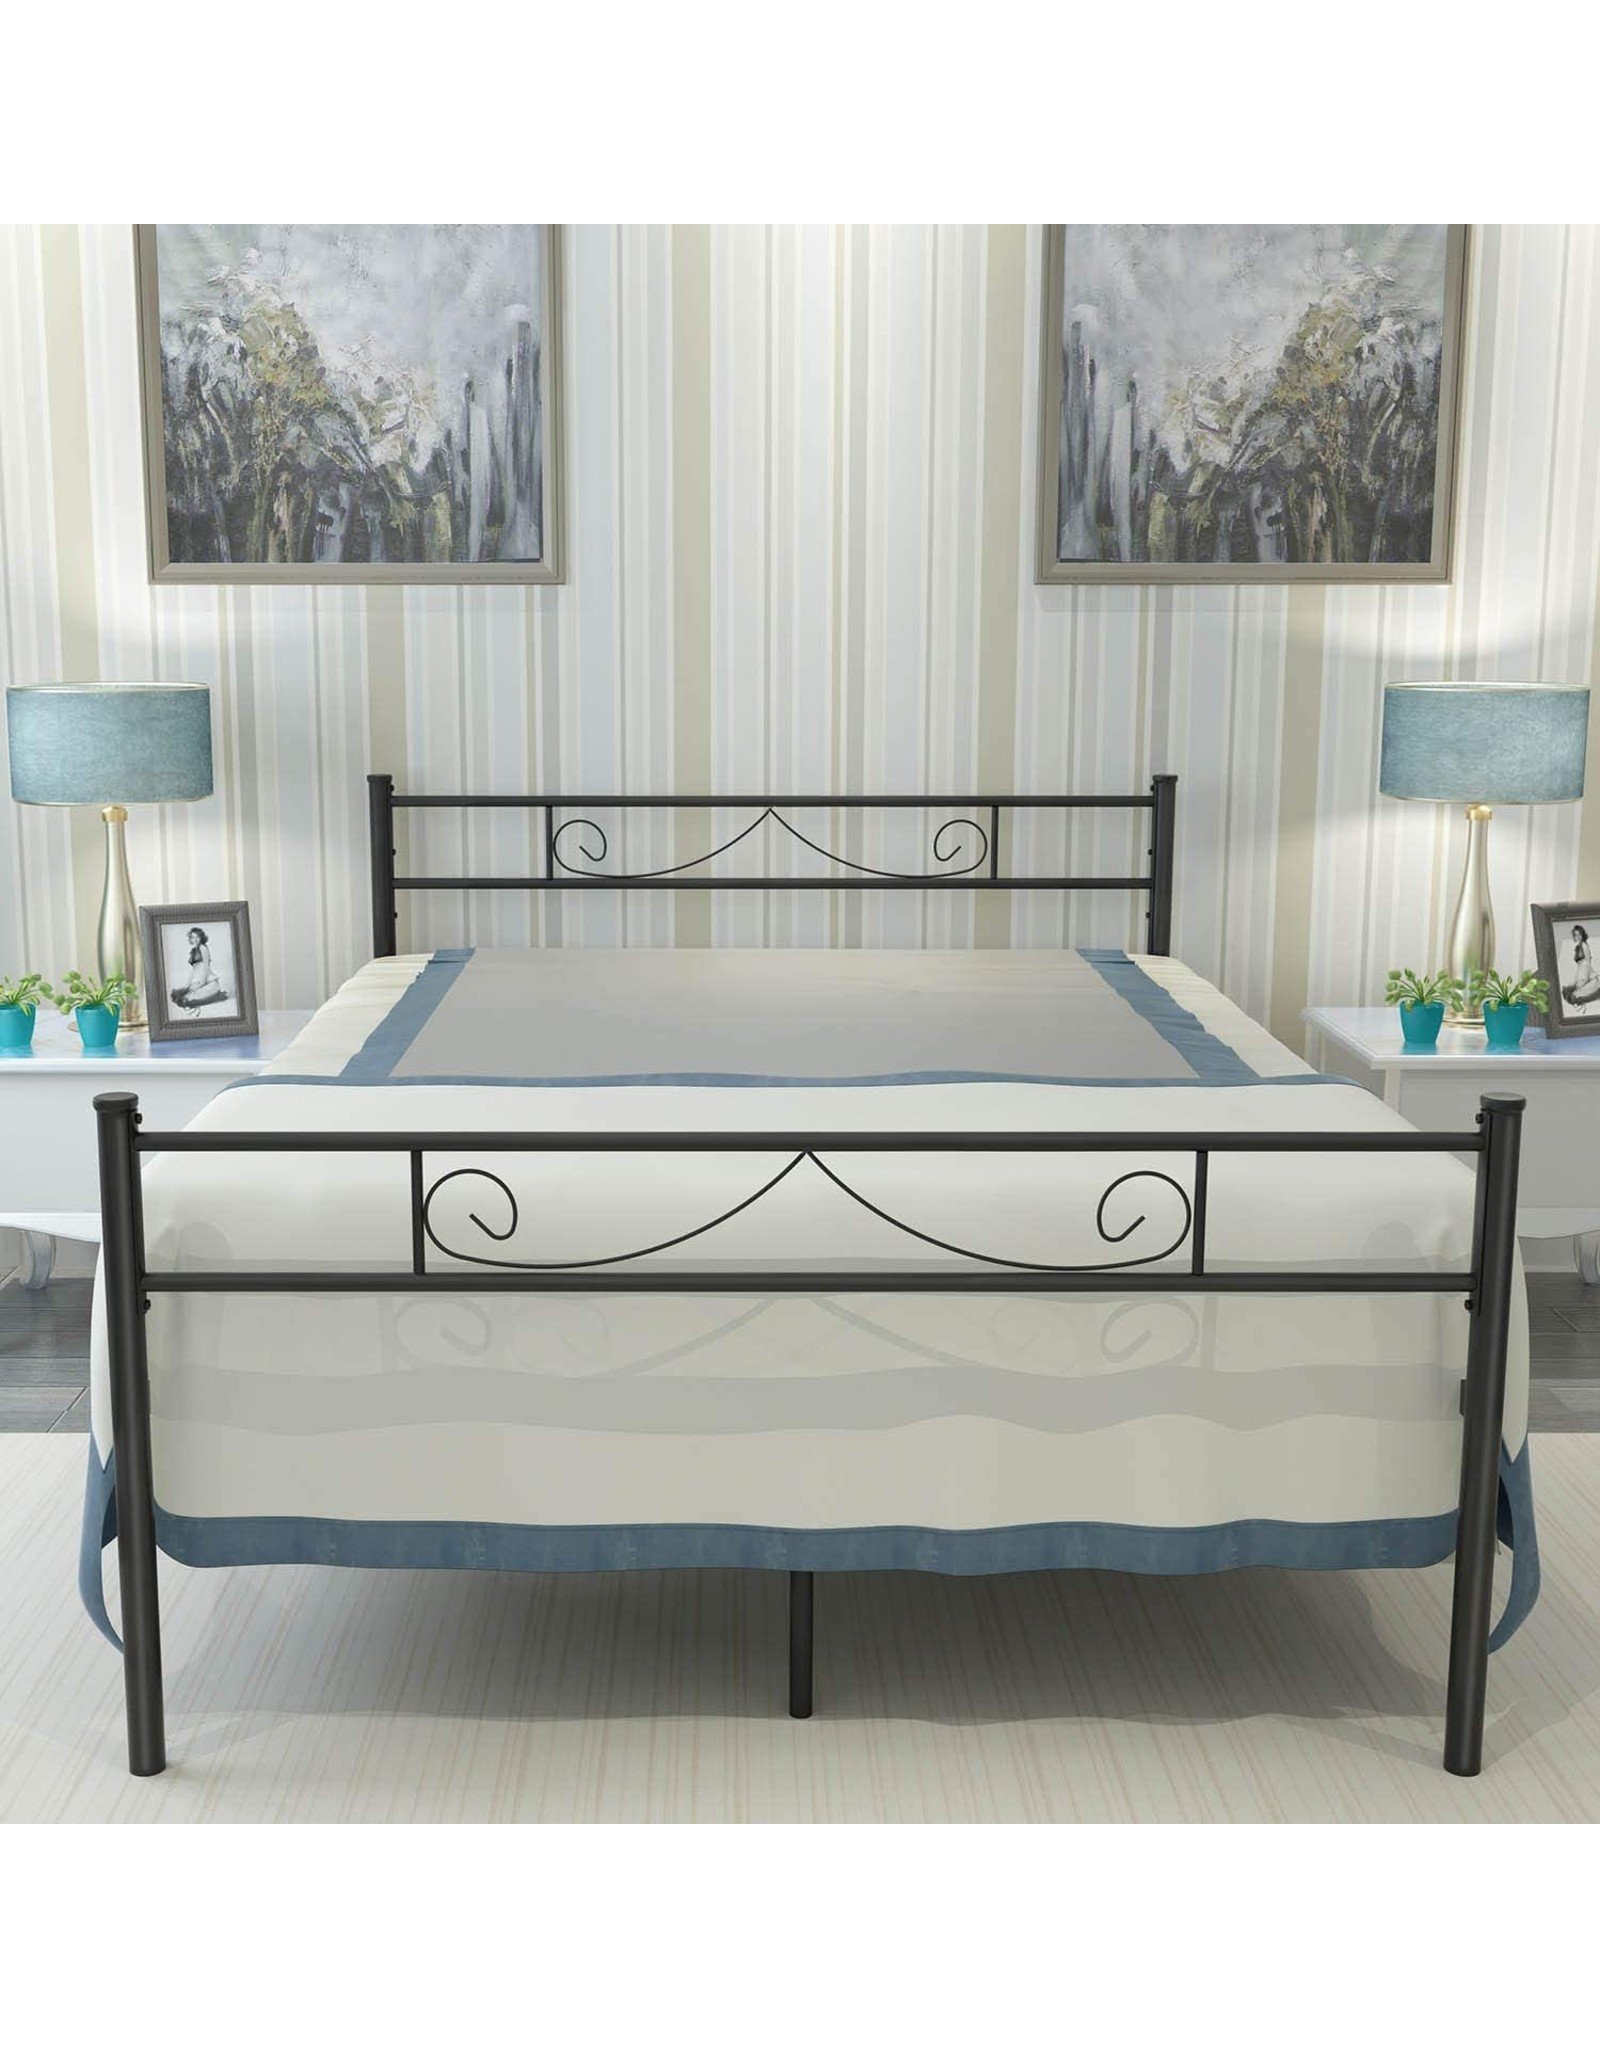 Haageep 18 Inch Queen Bed Frame, Queen Bed Frame With Headboard No Box Spring Needed